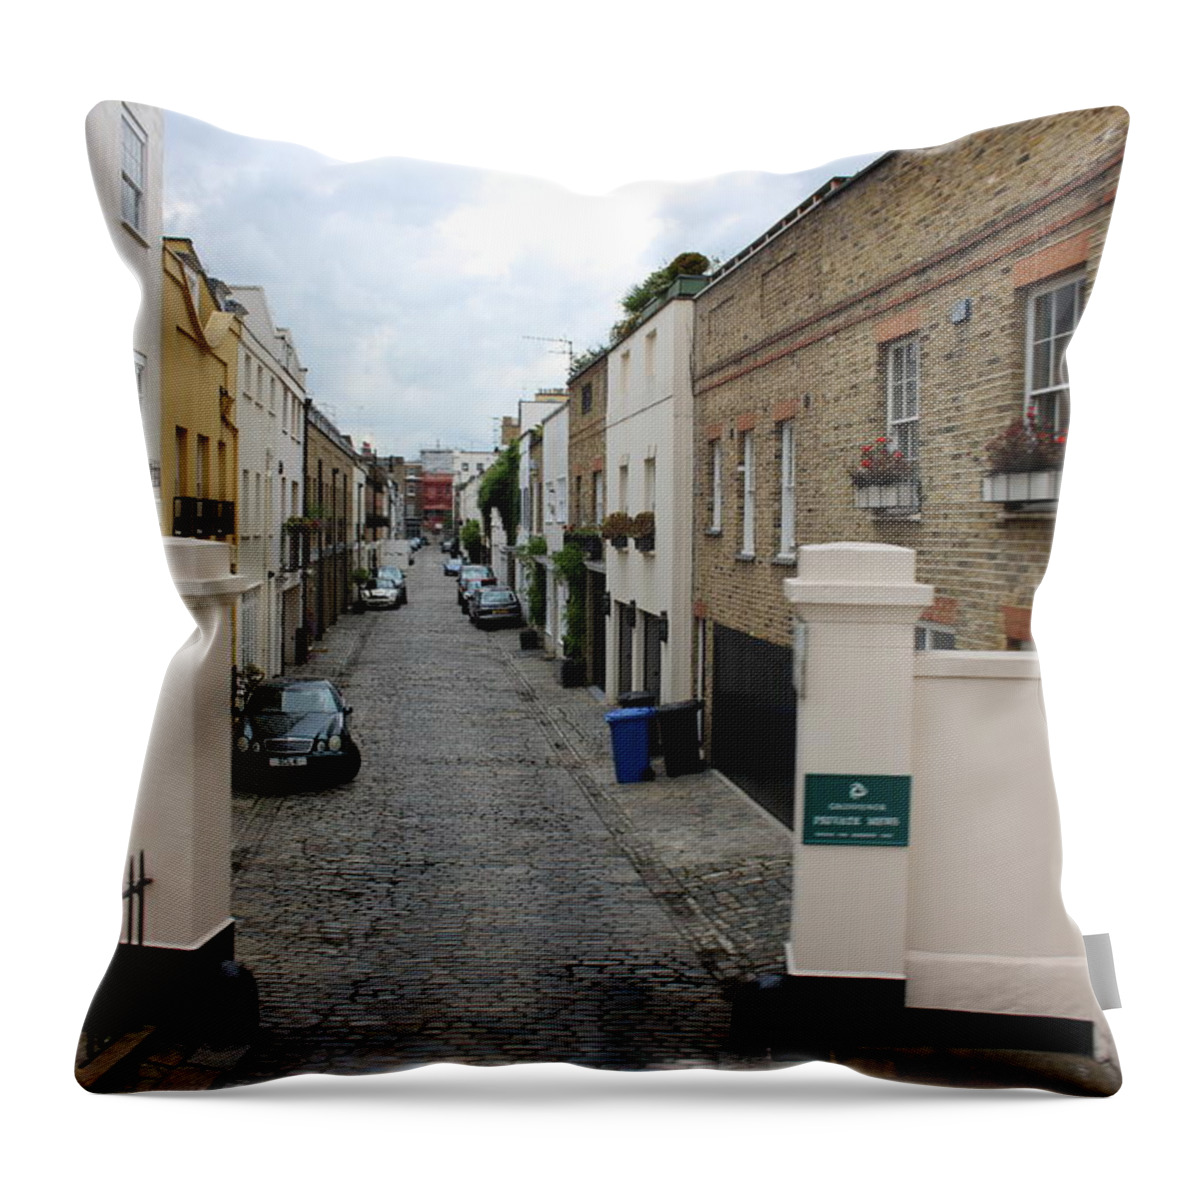 Street Throw Pillow featuring the photograph Cobblestone London Street by Laura Smith